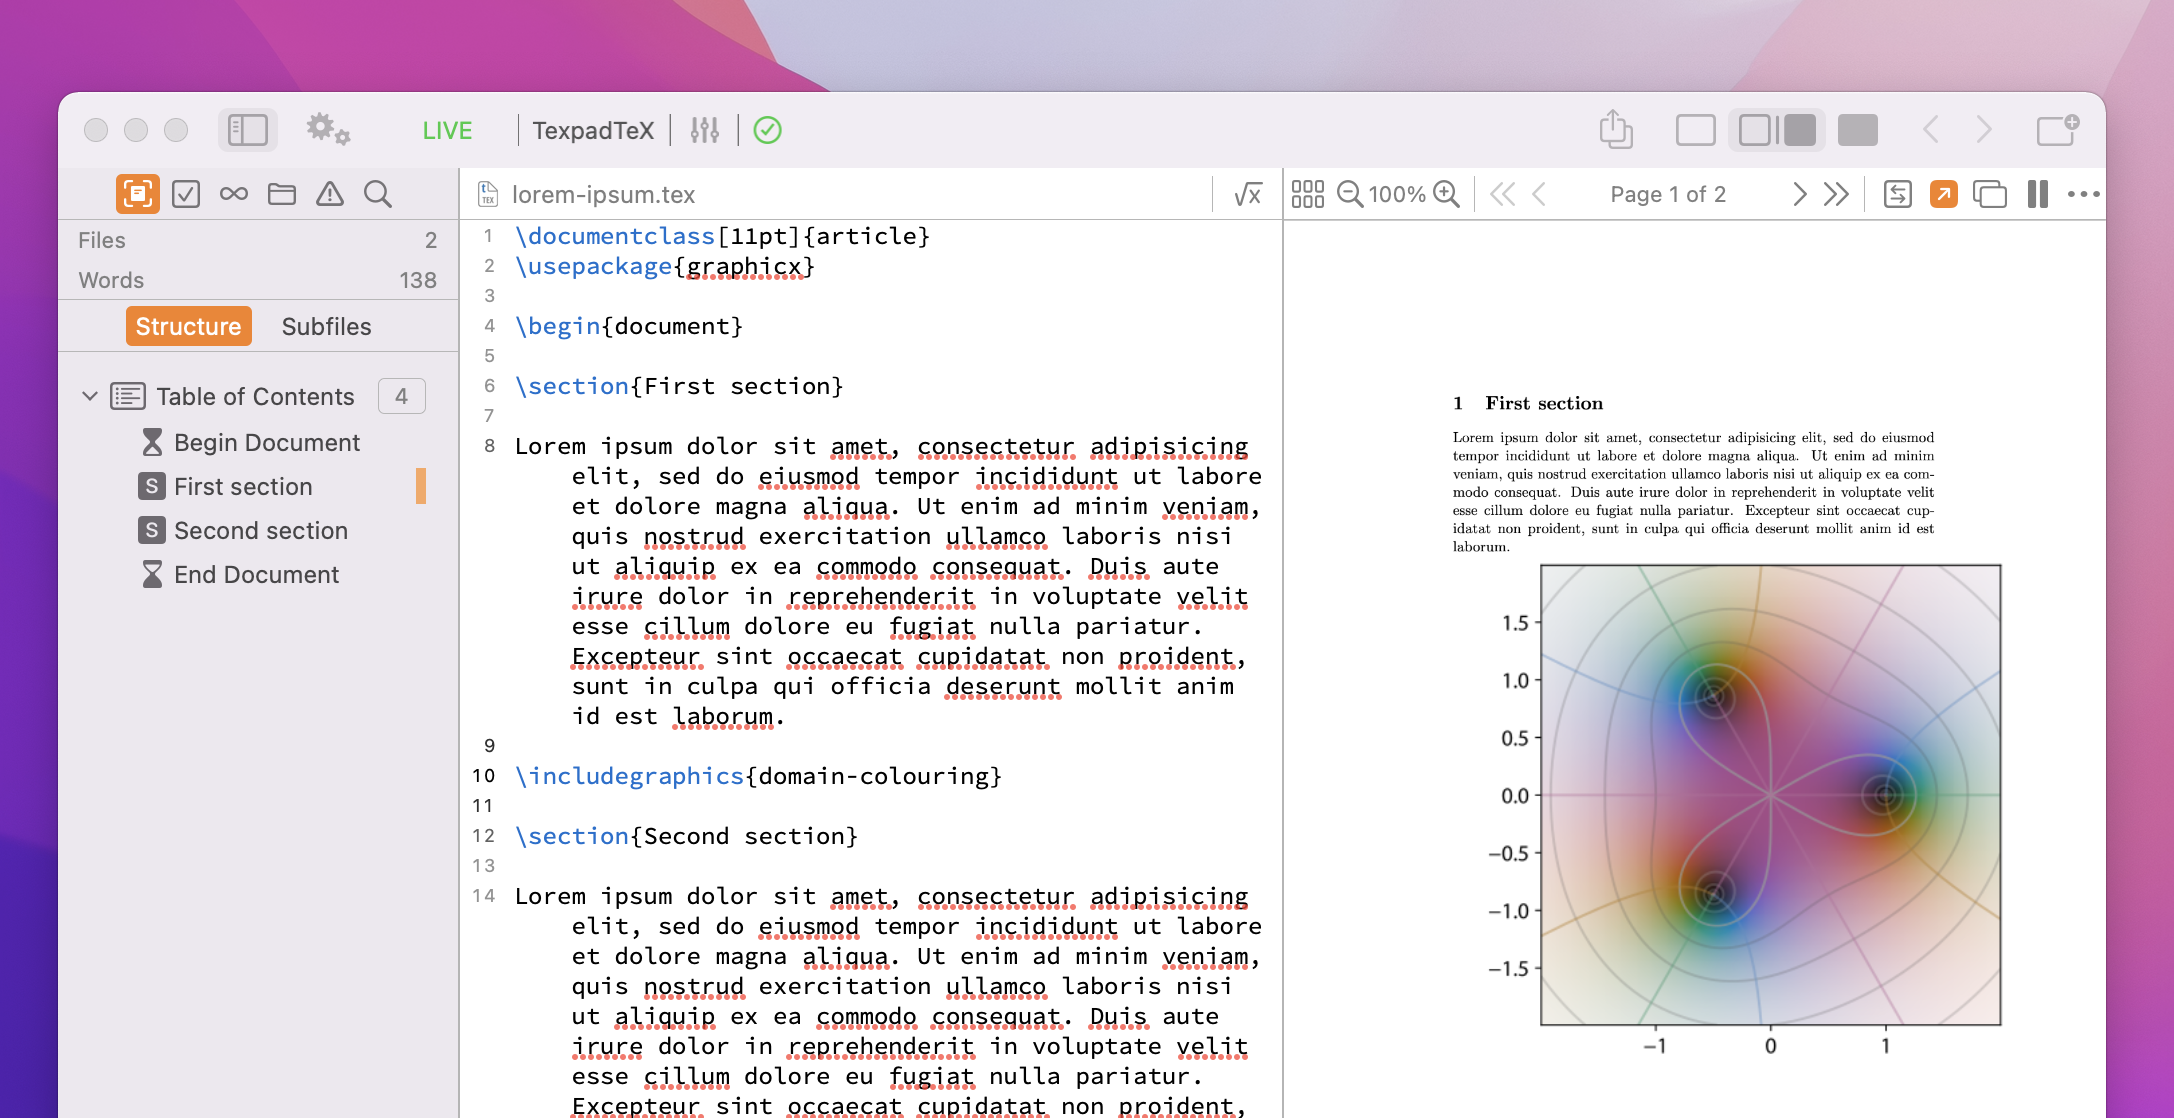 docs/apps/workspace/typesetting/images/drag-drop-image-result_macos.png